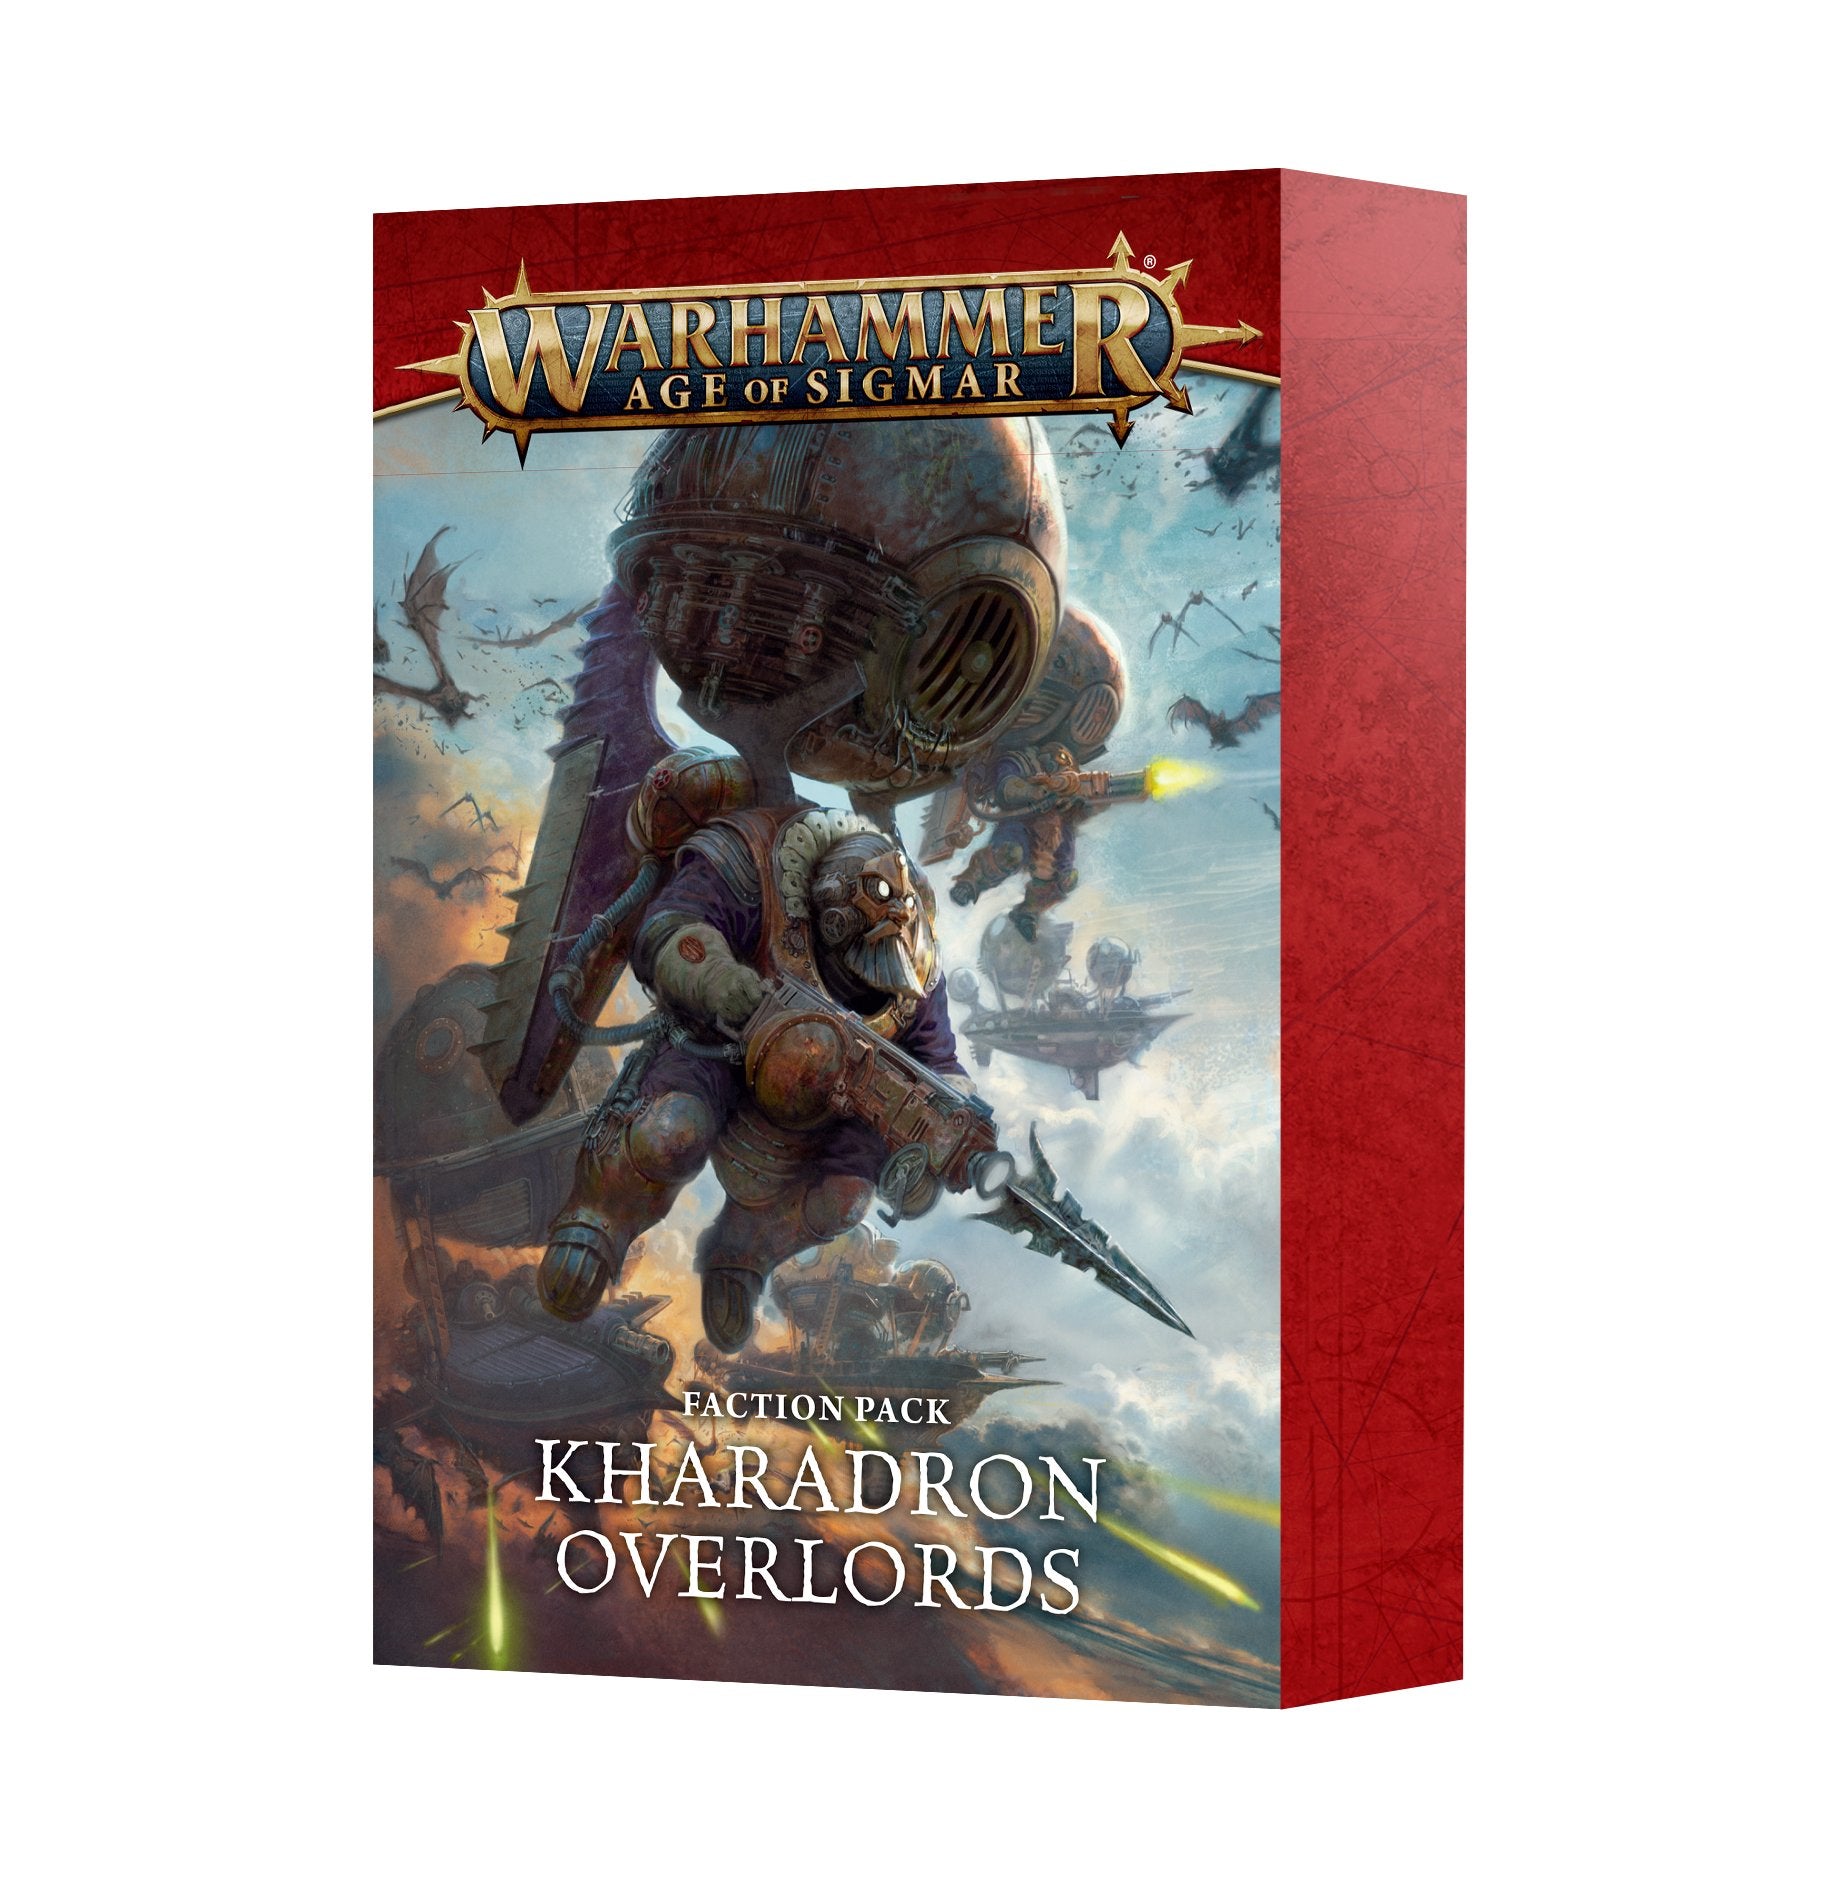 Faction Pack Kharadron Overlords Pre-Order